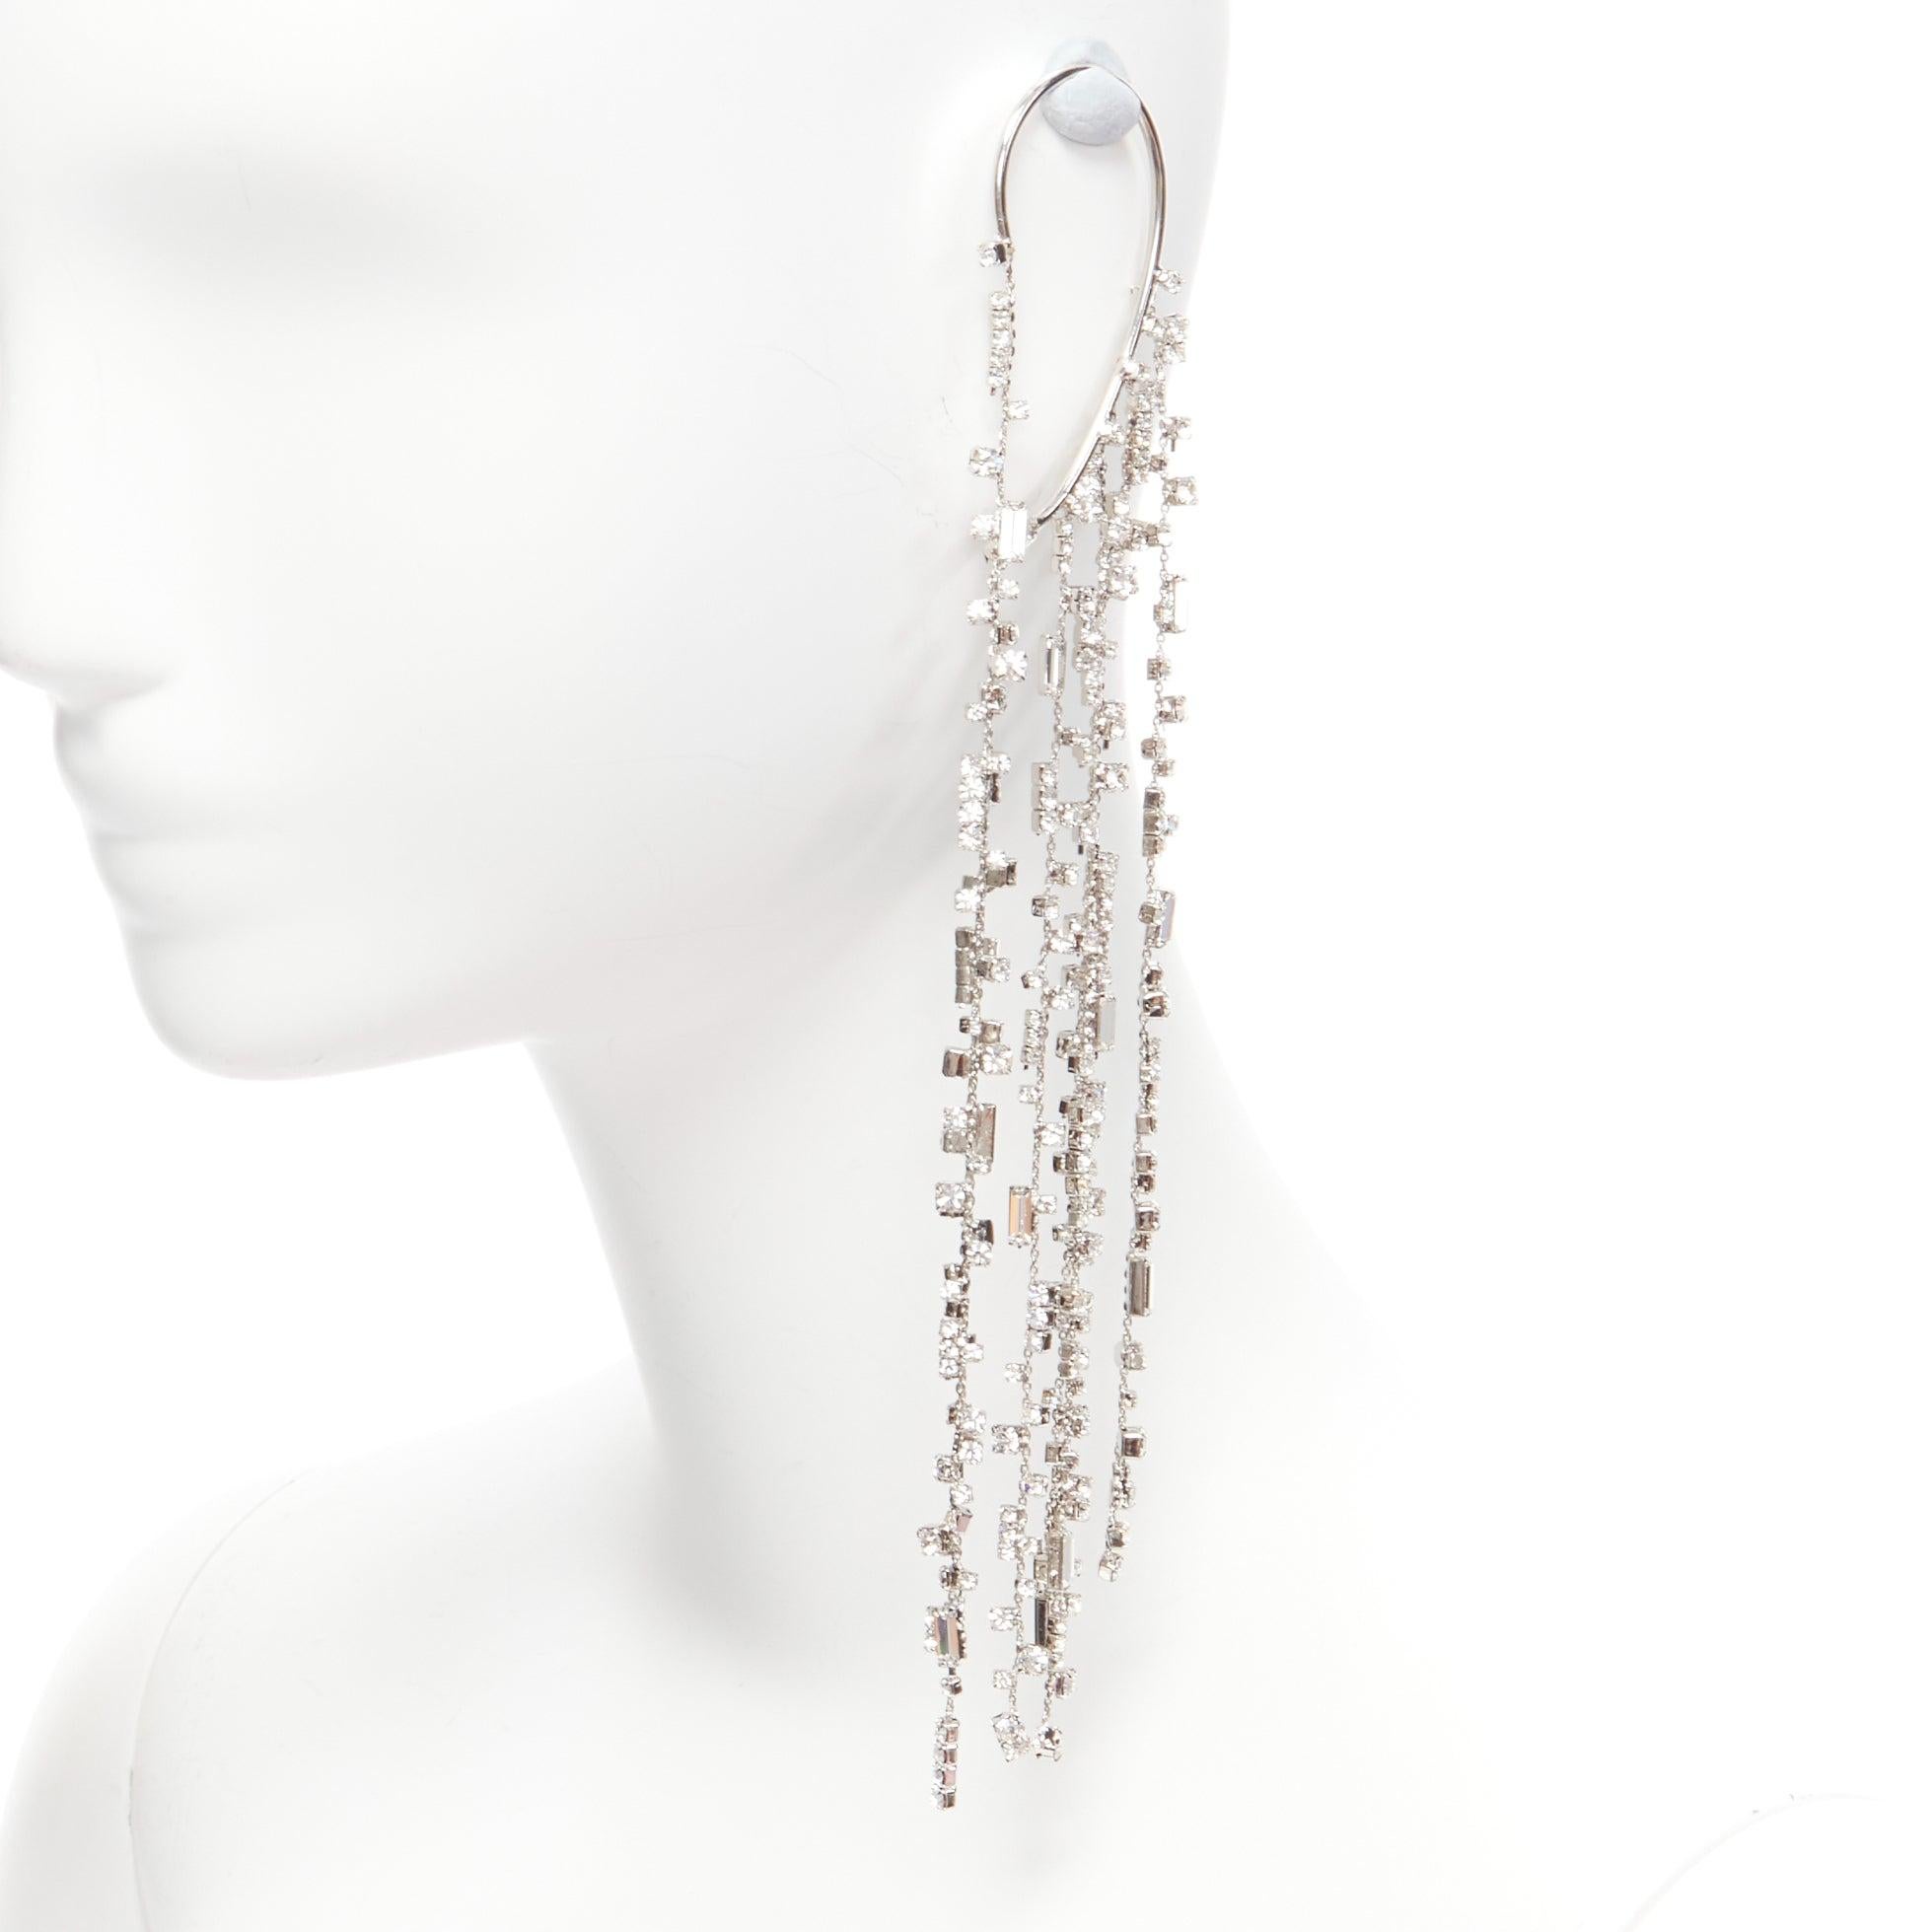 OFF WHITE crystal chandelier silver metal clip on ear cuff single
Reference: BSHW/A00103
Brand: Off White
Designer: Virgil Abloh
Material: Metal
Color: Silver, Clear
Pattern: Solid
Closure: Clip On
Lining: Silver Metal
Extra Details: Worn on left